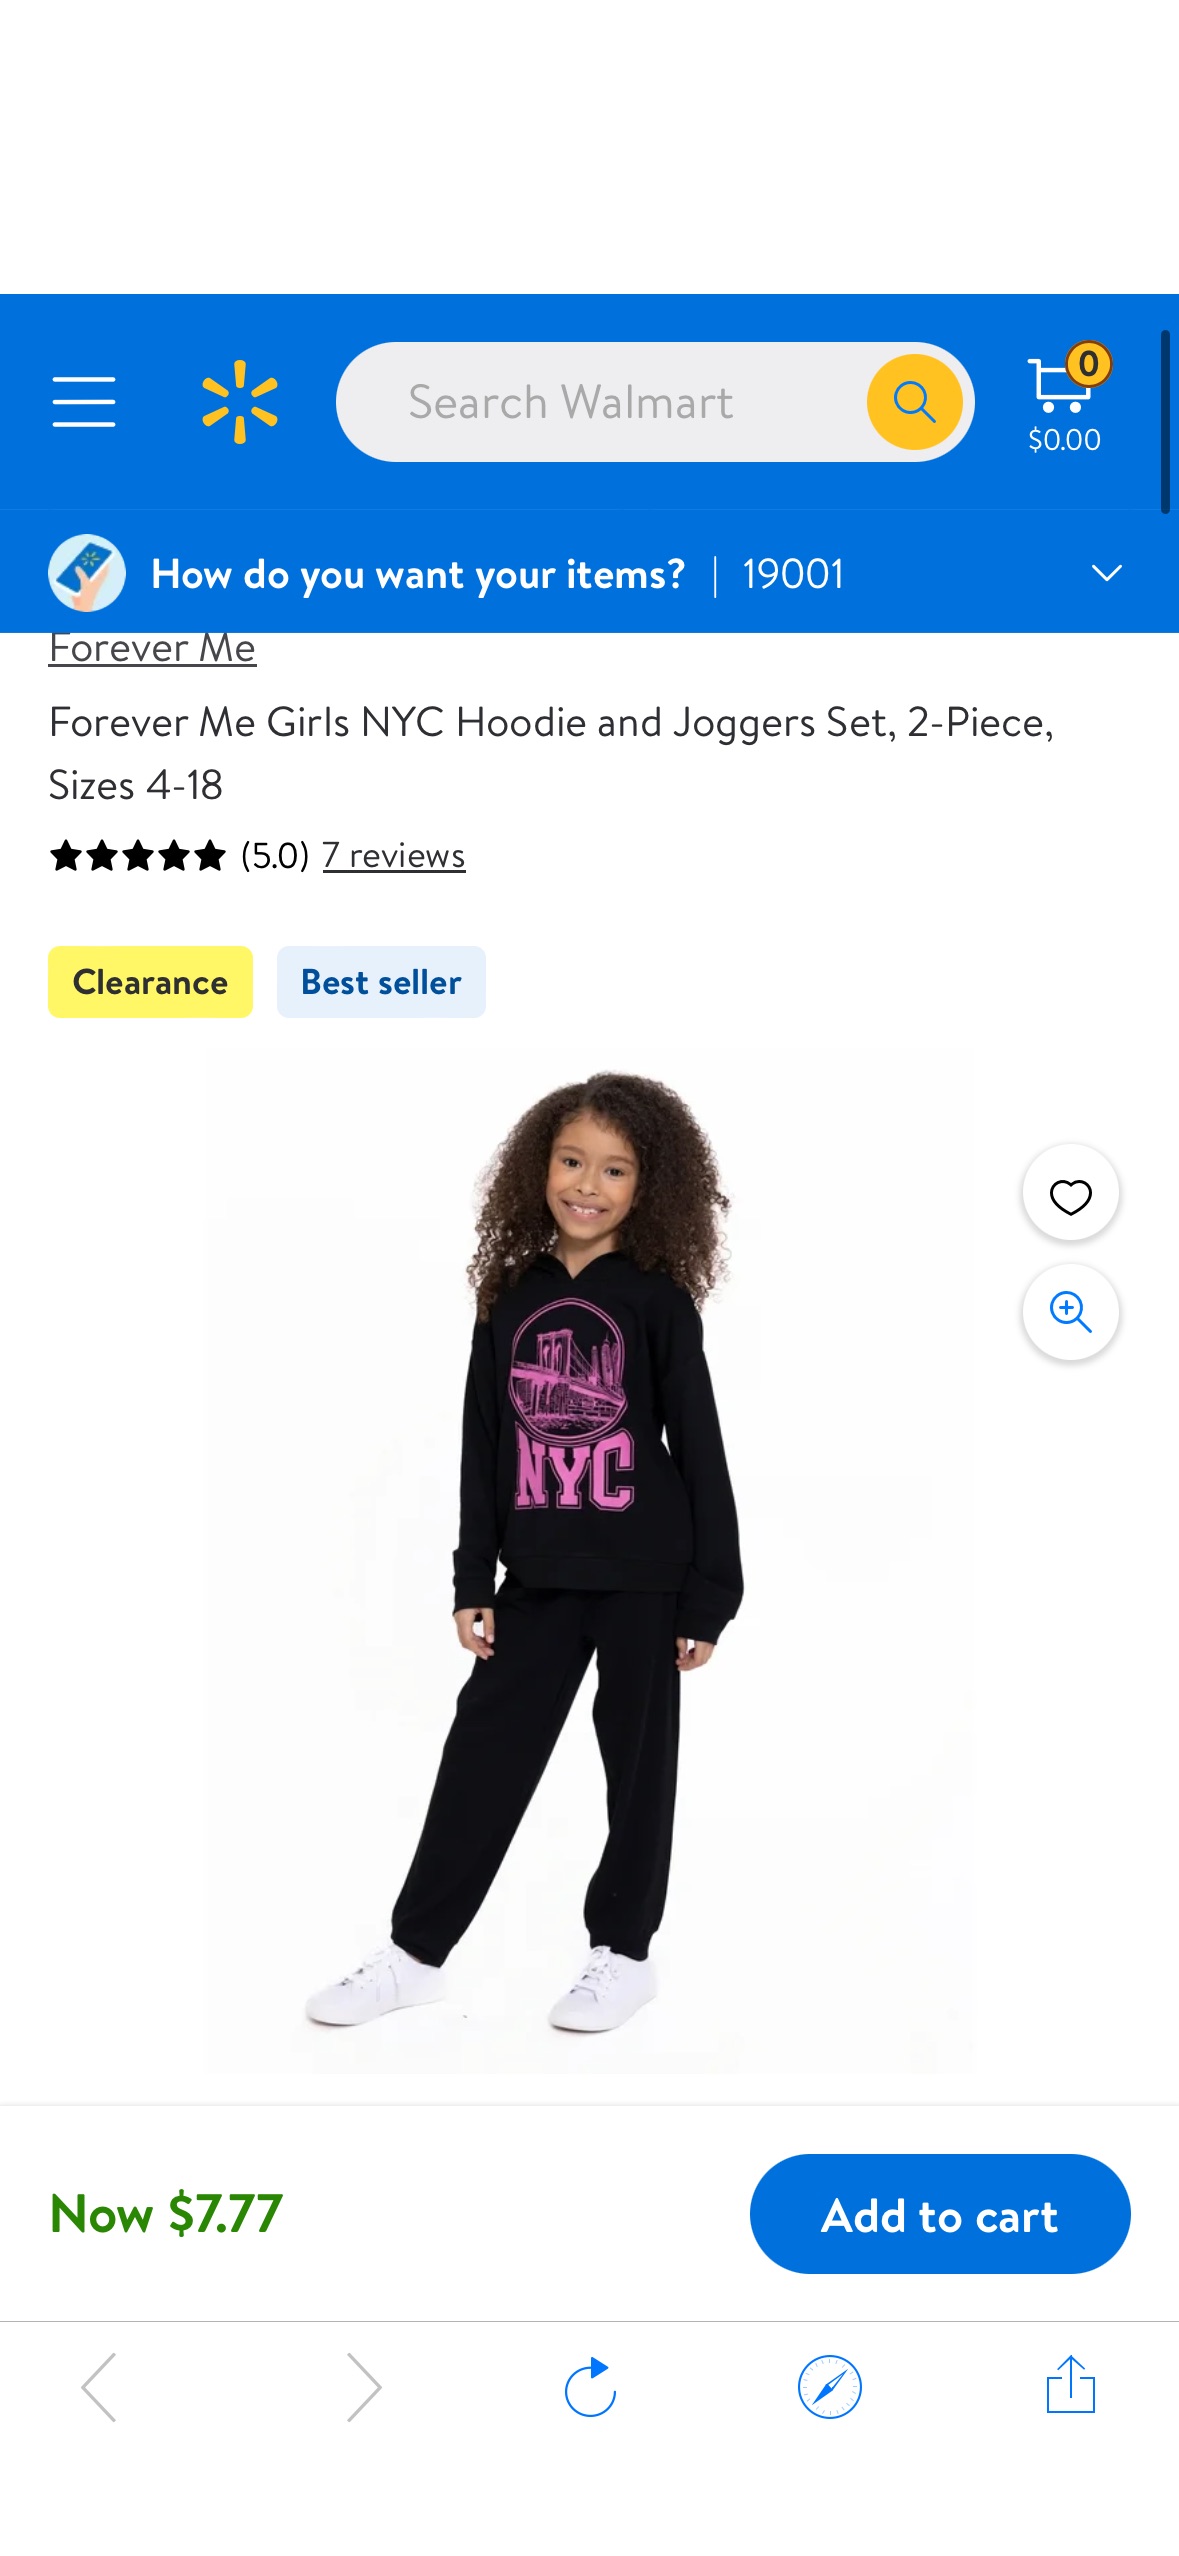 Forever Me Girls NYC Hoodie and Joggers Set, 2-Piece, Sizes 4-18 - Walmart.com